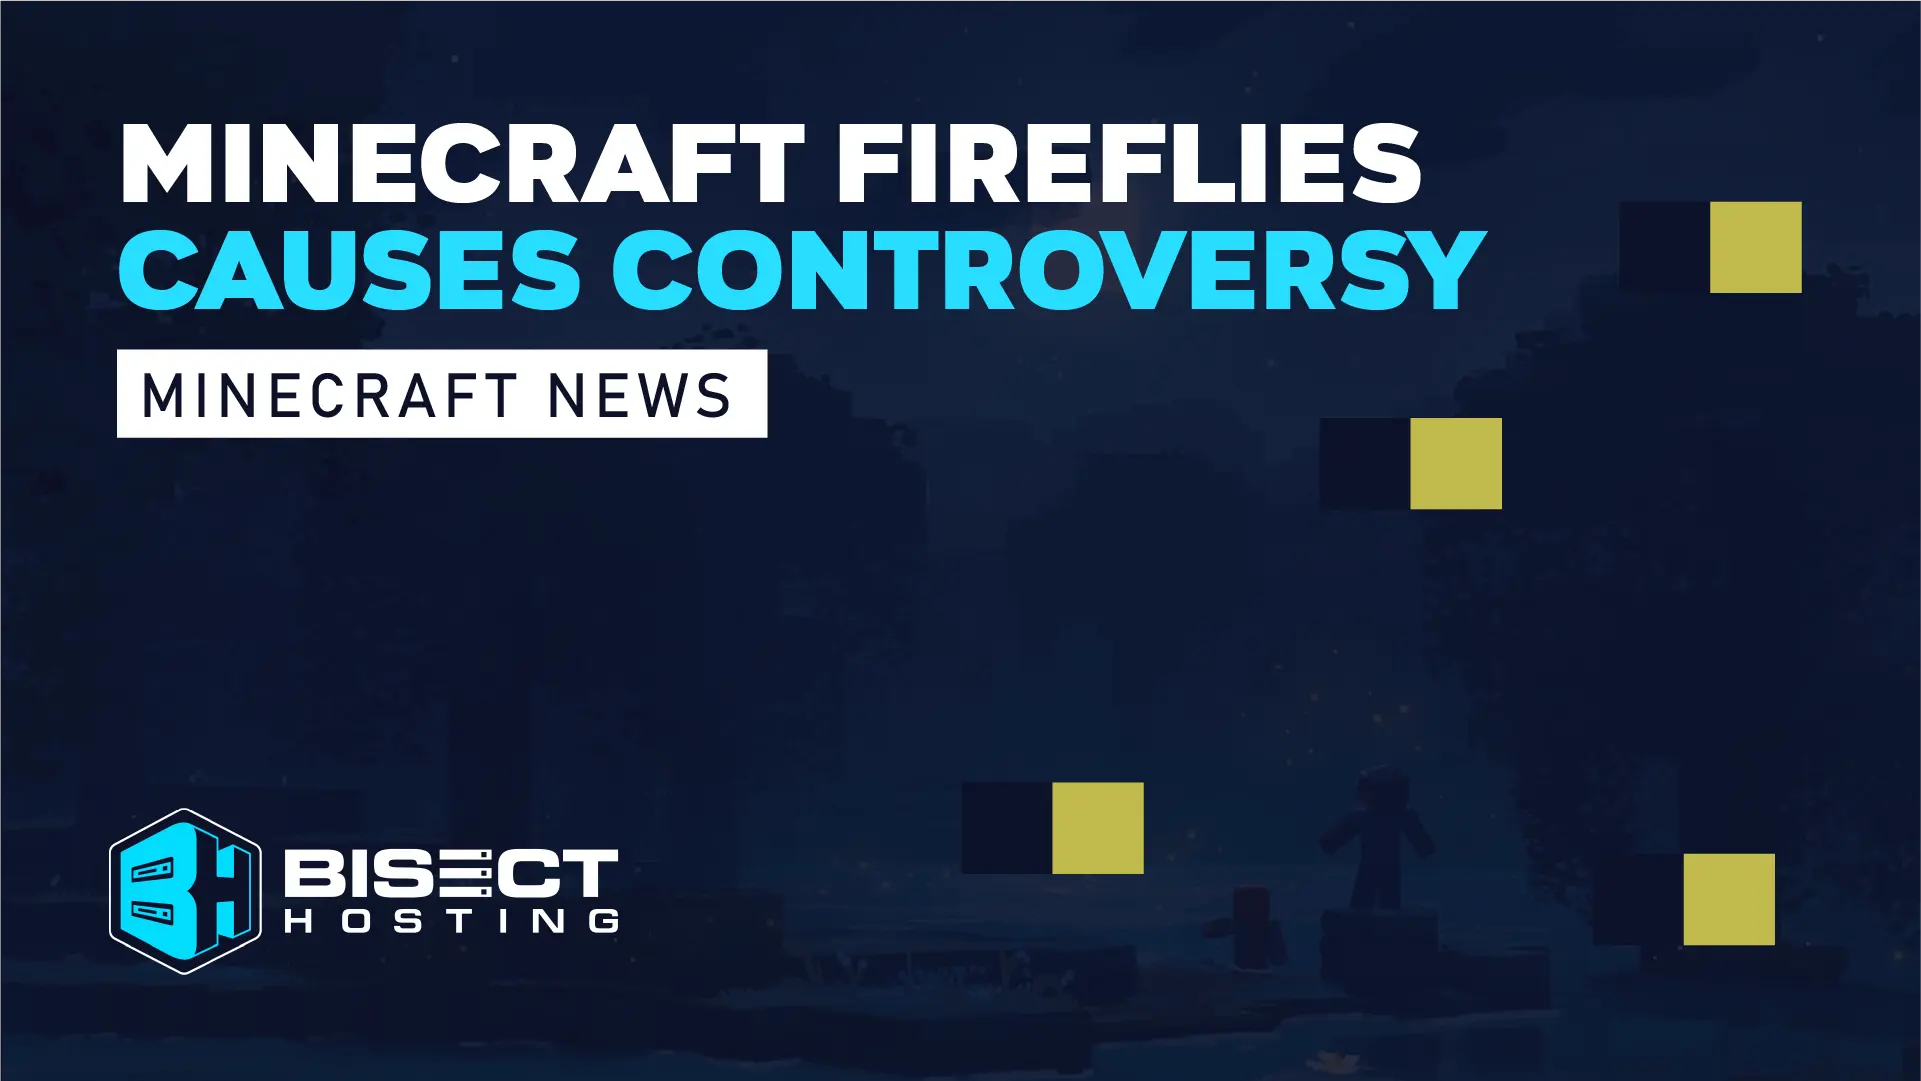 The Canceled Features of Minecraft 1.19 – Fireflies, Biome Updates, & More